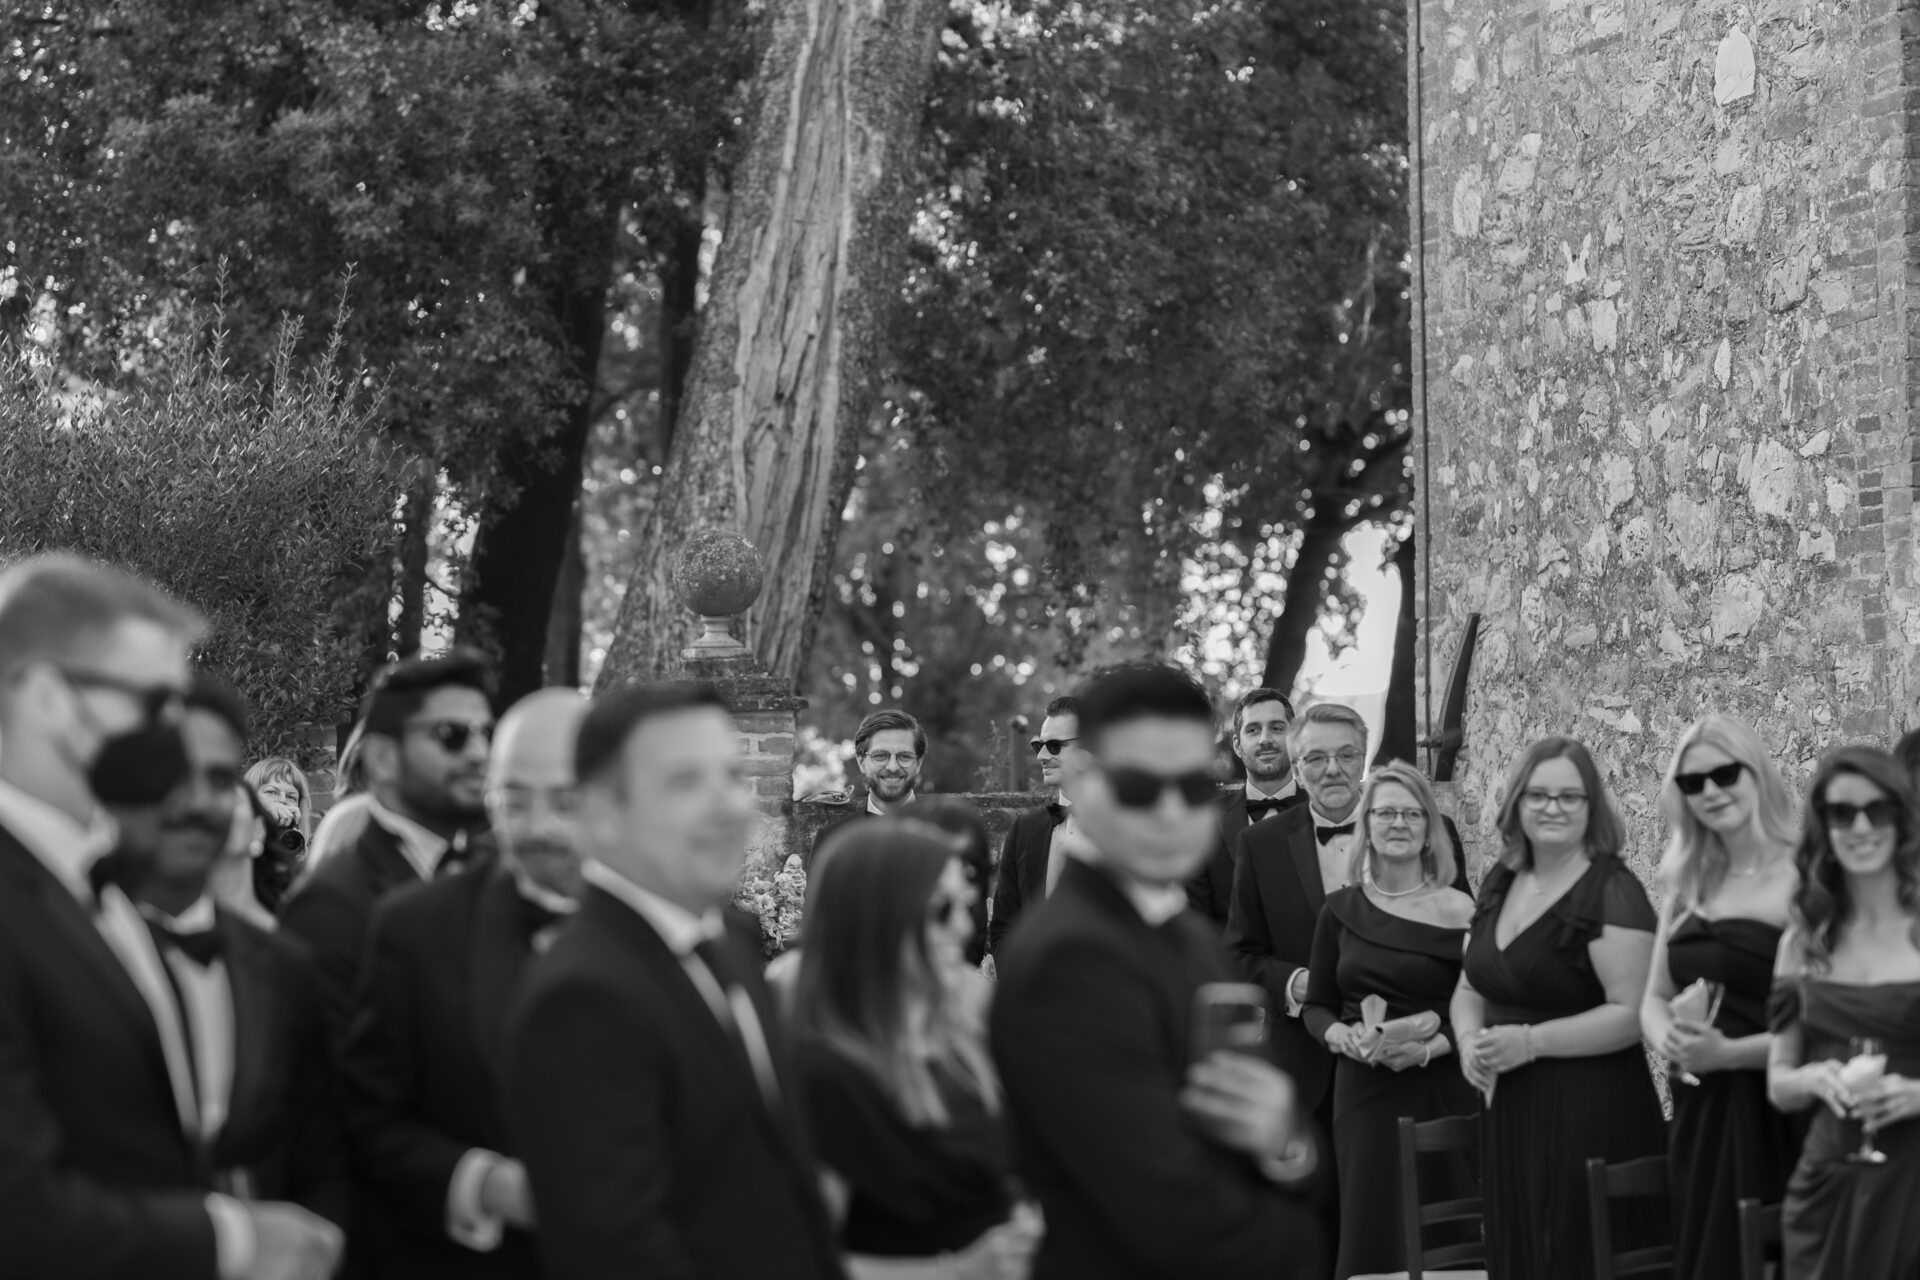 The groom watches his bride approach down the aisle at his Italian wedding